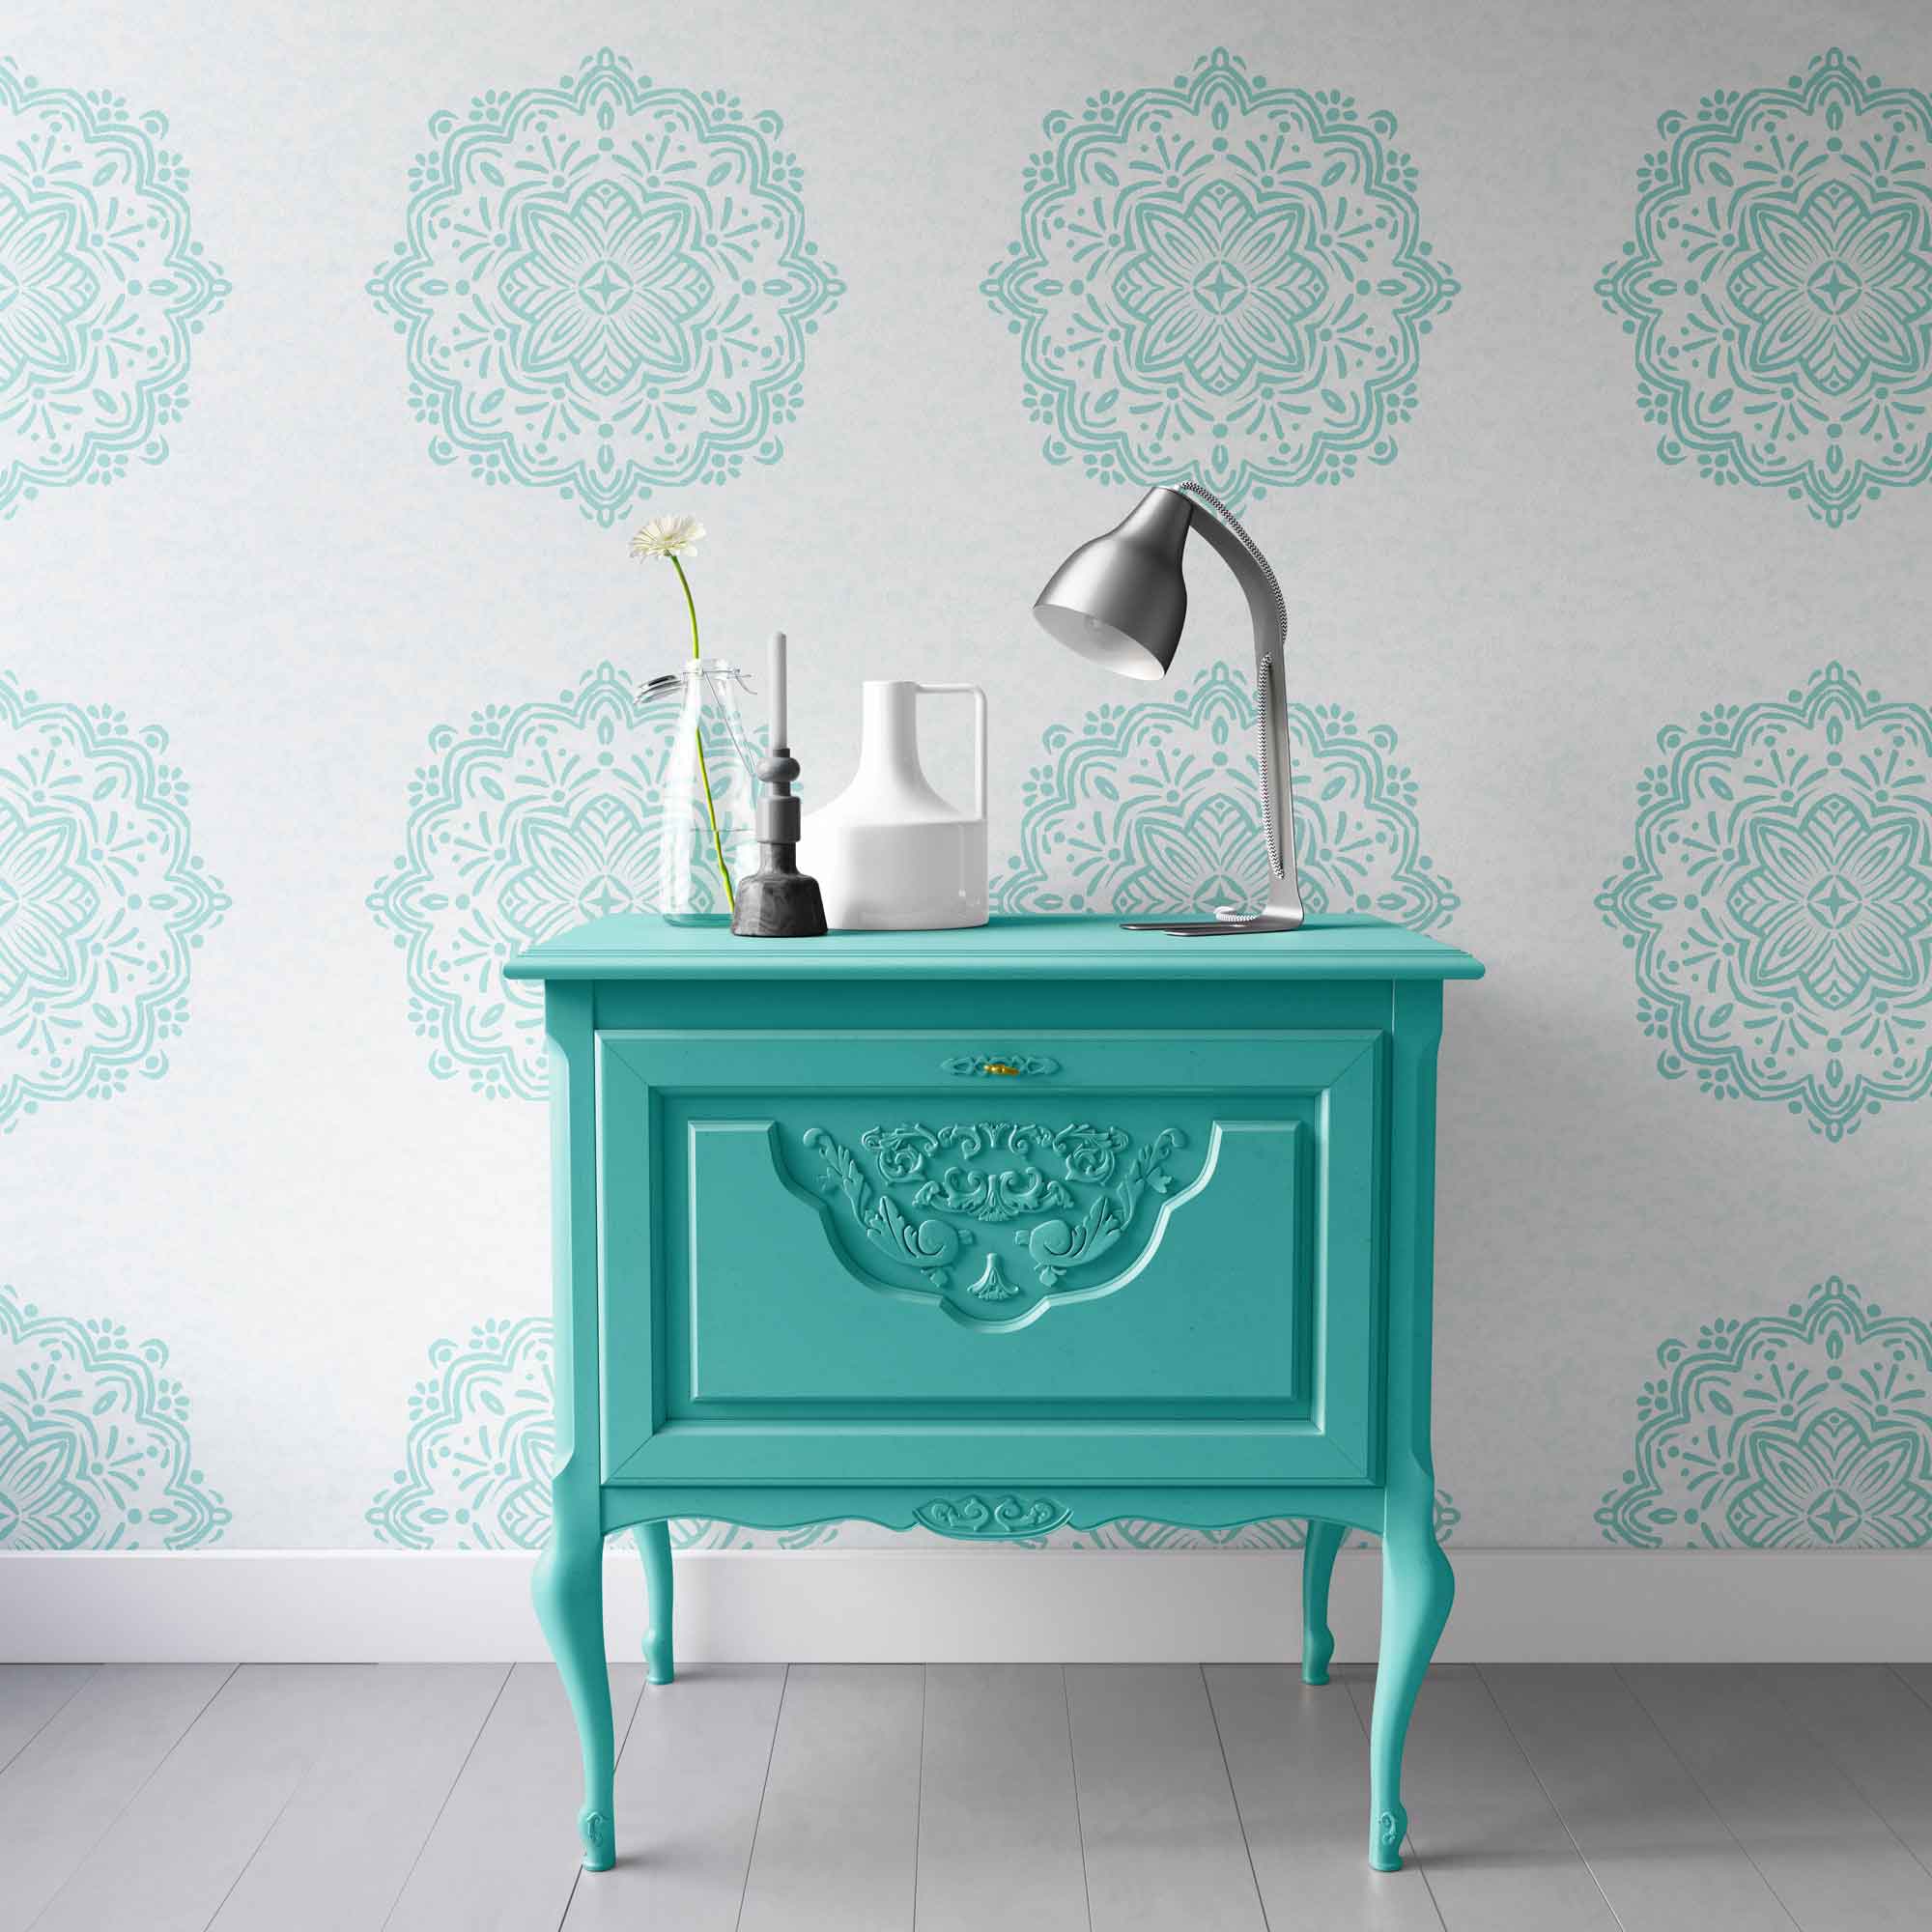 Hand-Drawn Aqua Boho Mandalas on White Watercolor Textured Background Removable Peel & Stick and Pre-Pasted Wallpaper - XL Size - Hallway Example